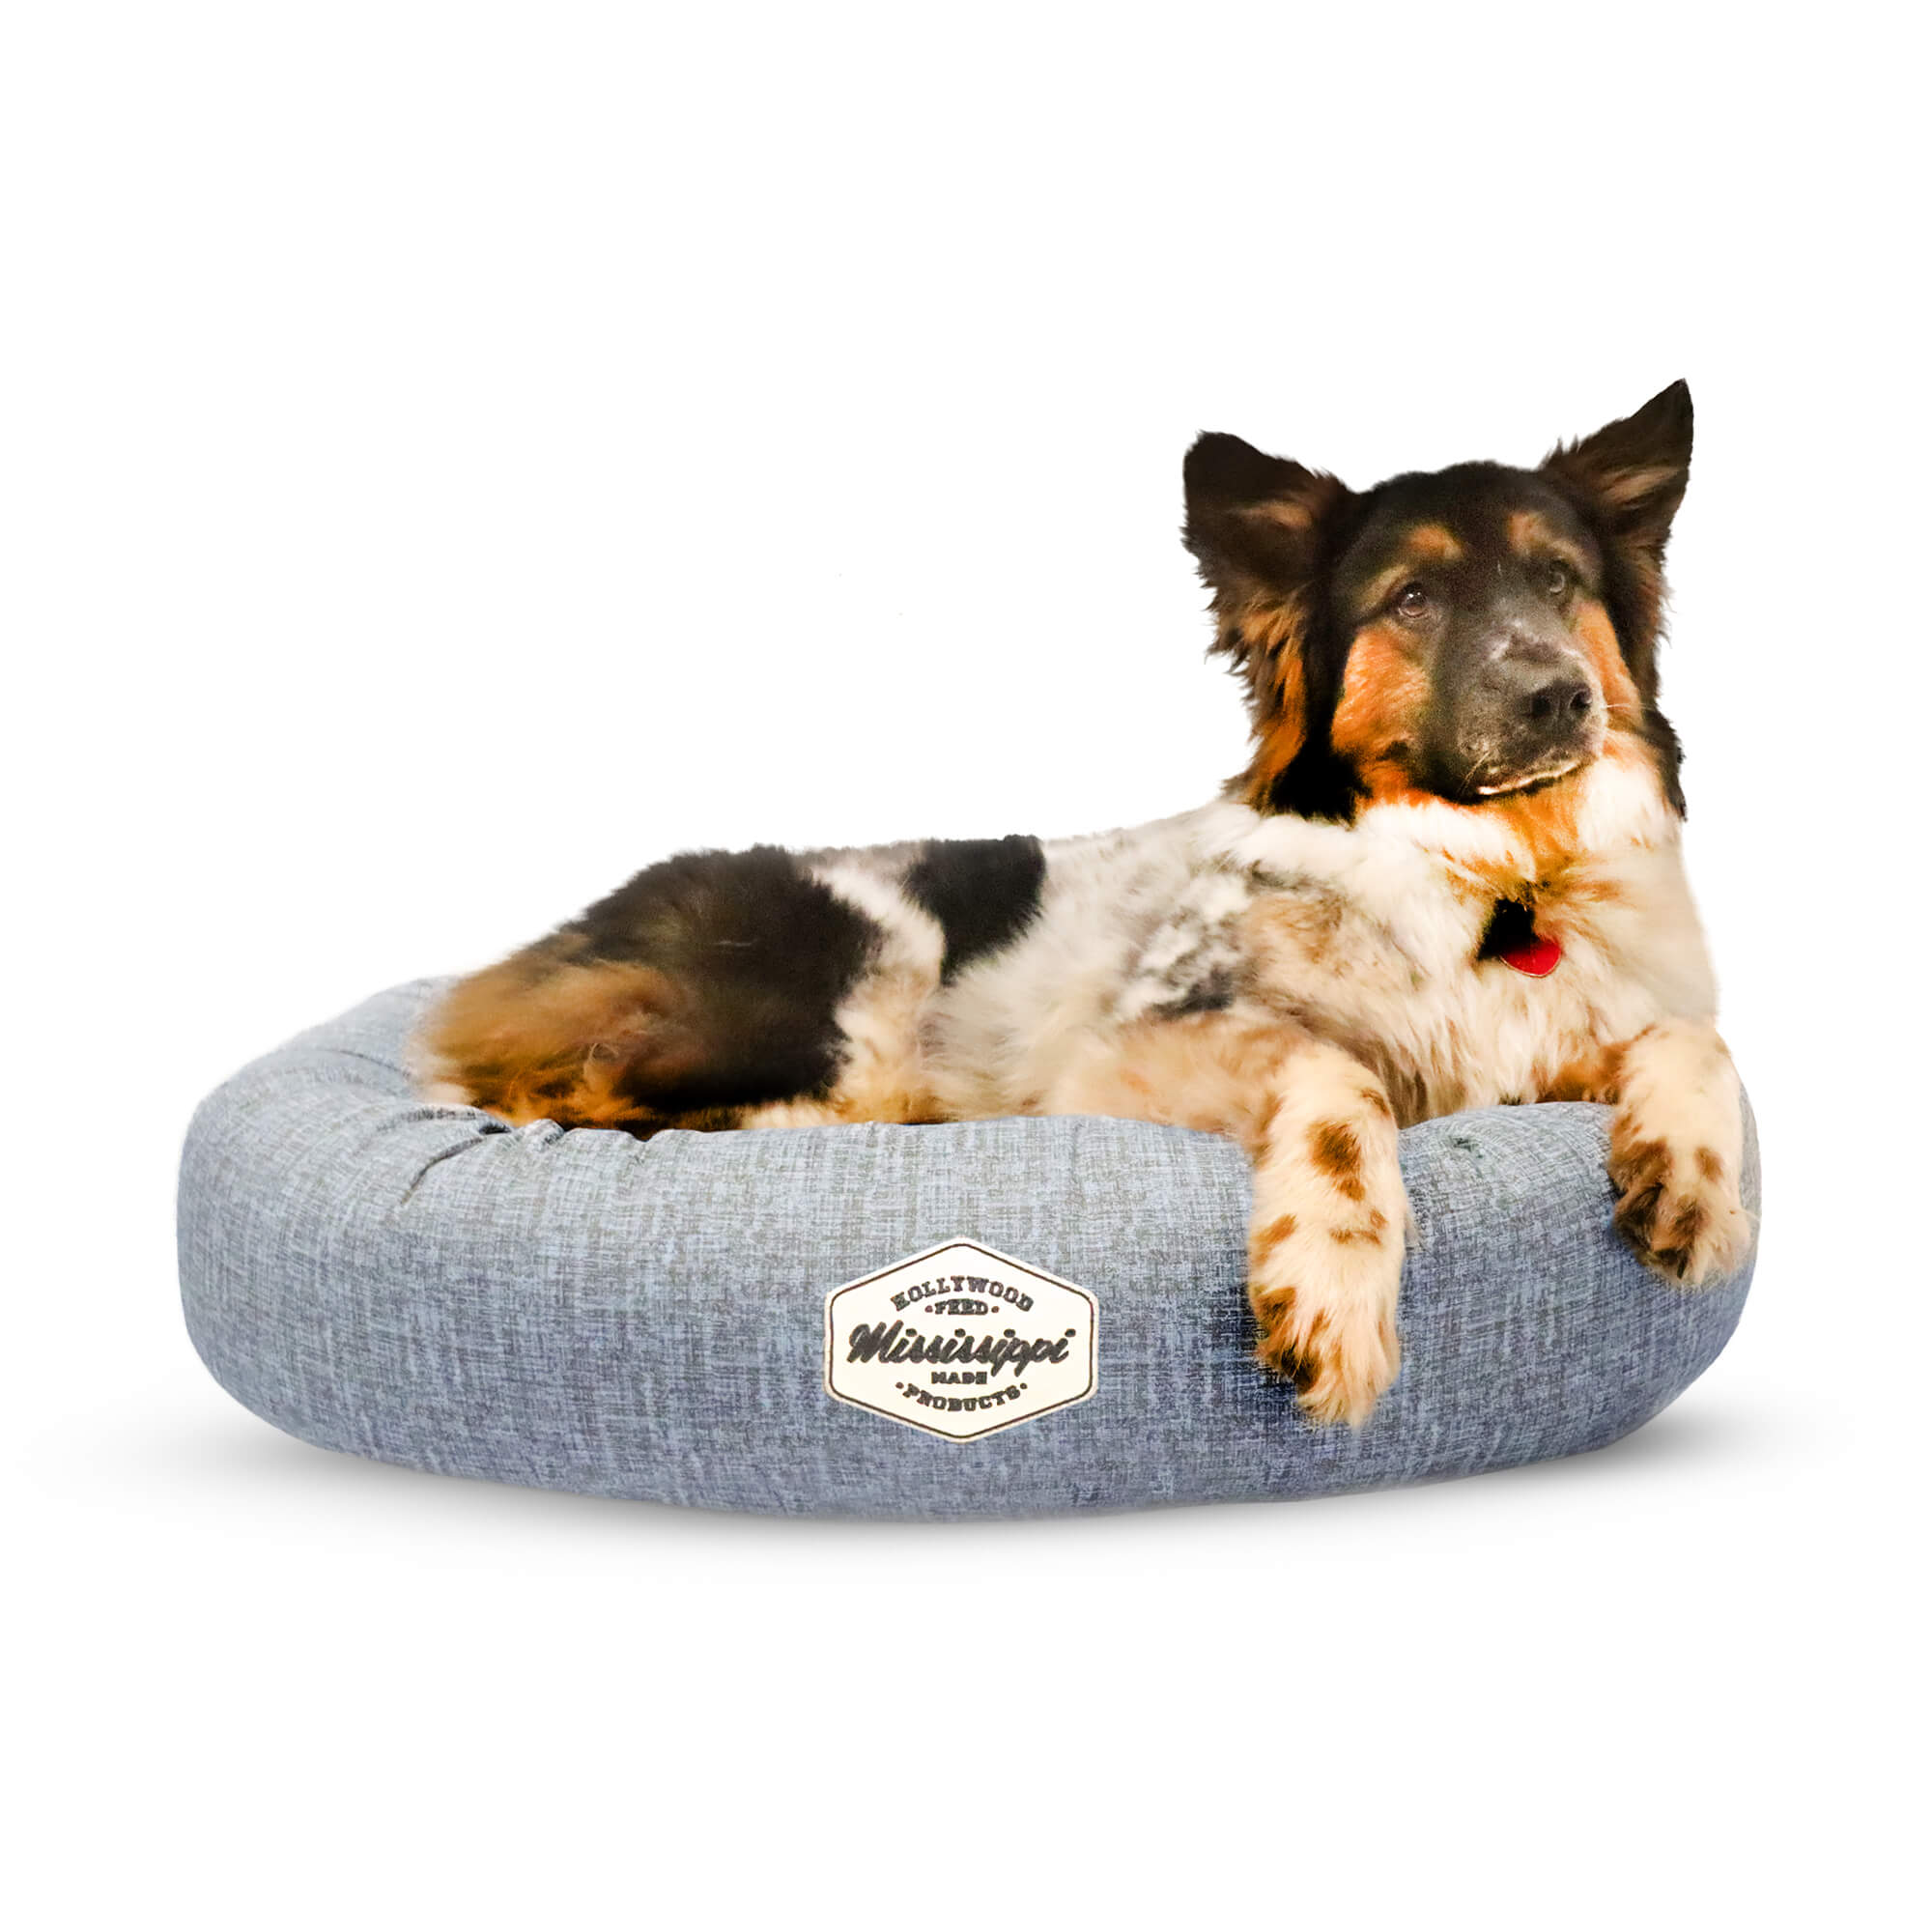 blue cotton donut bed front view with dog